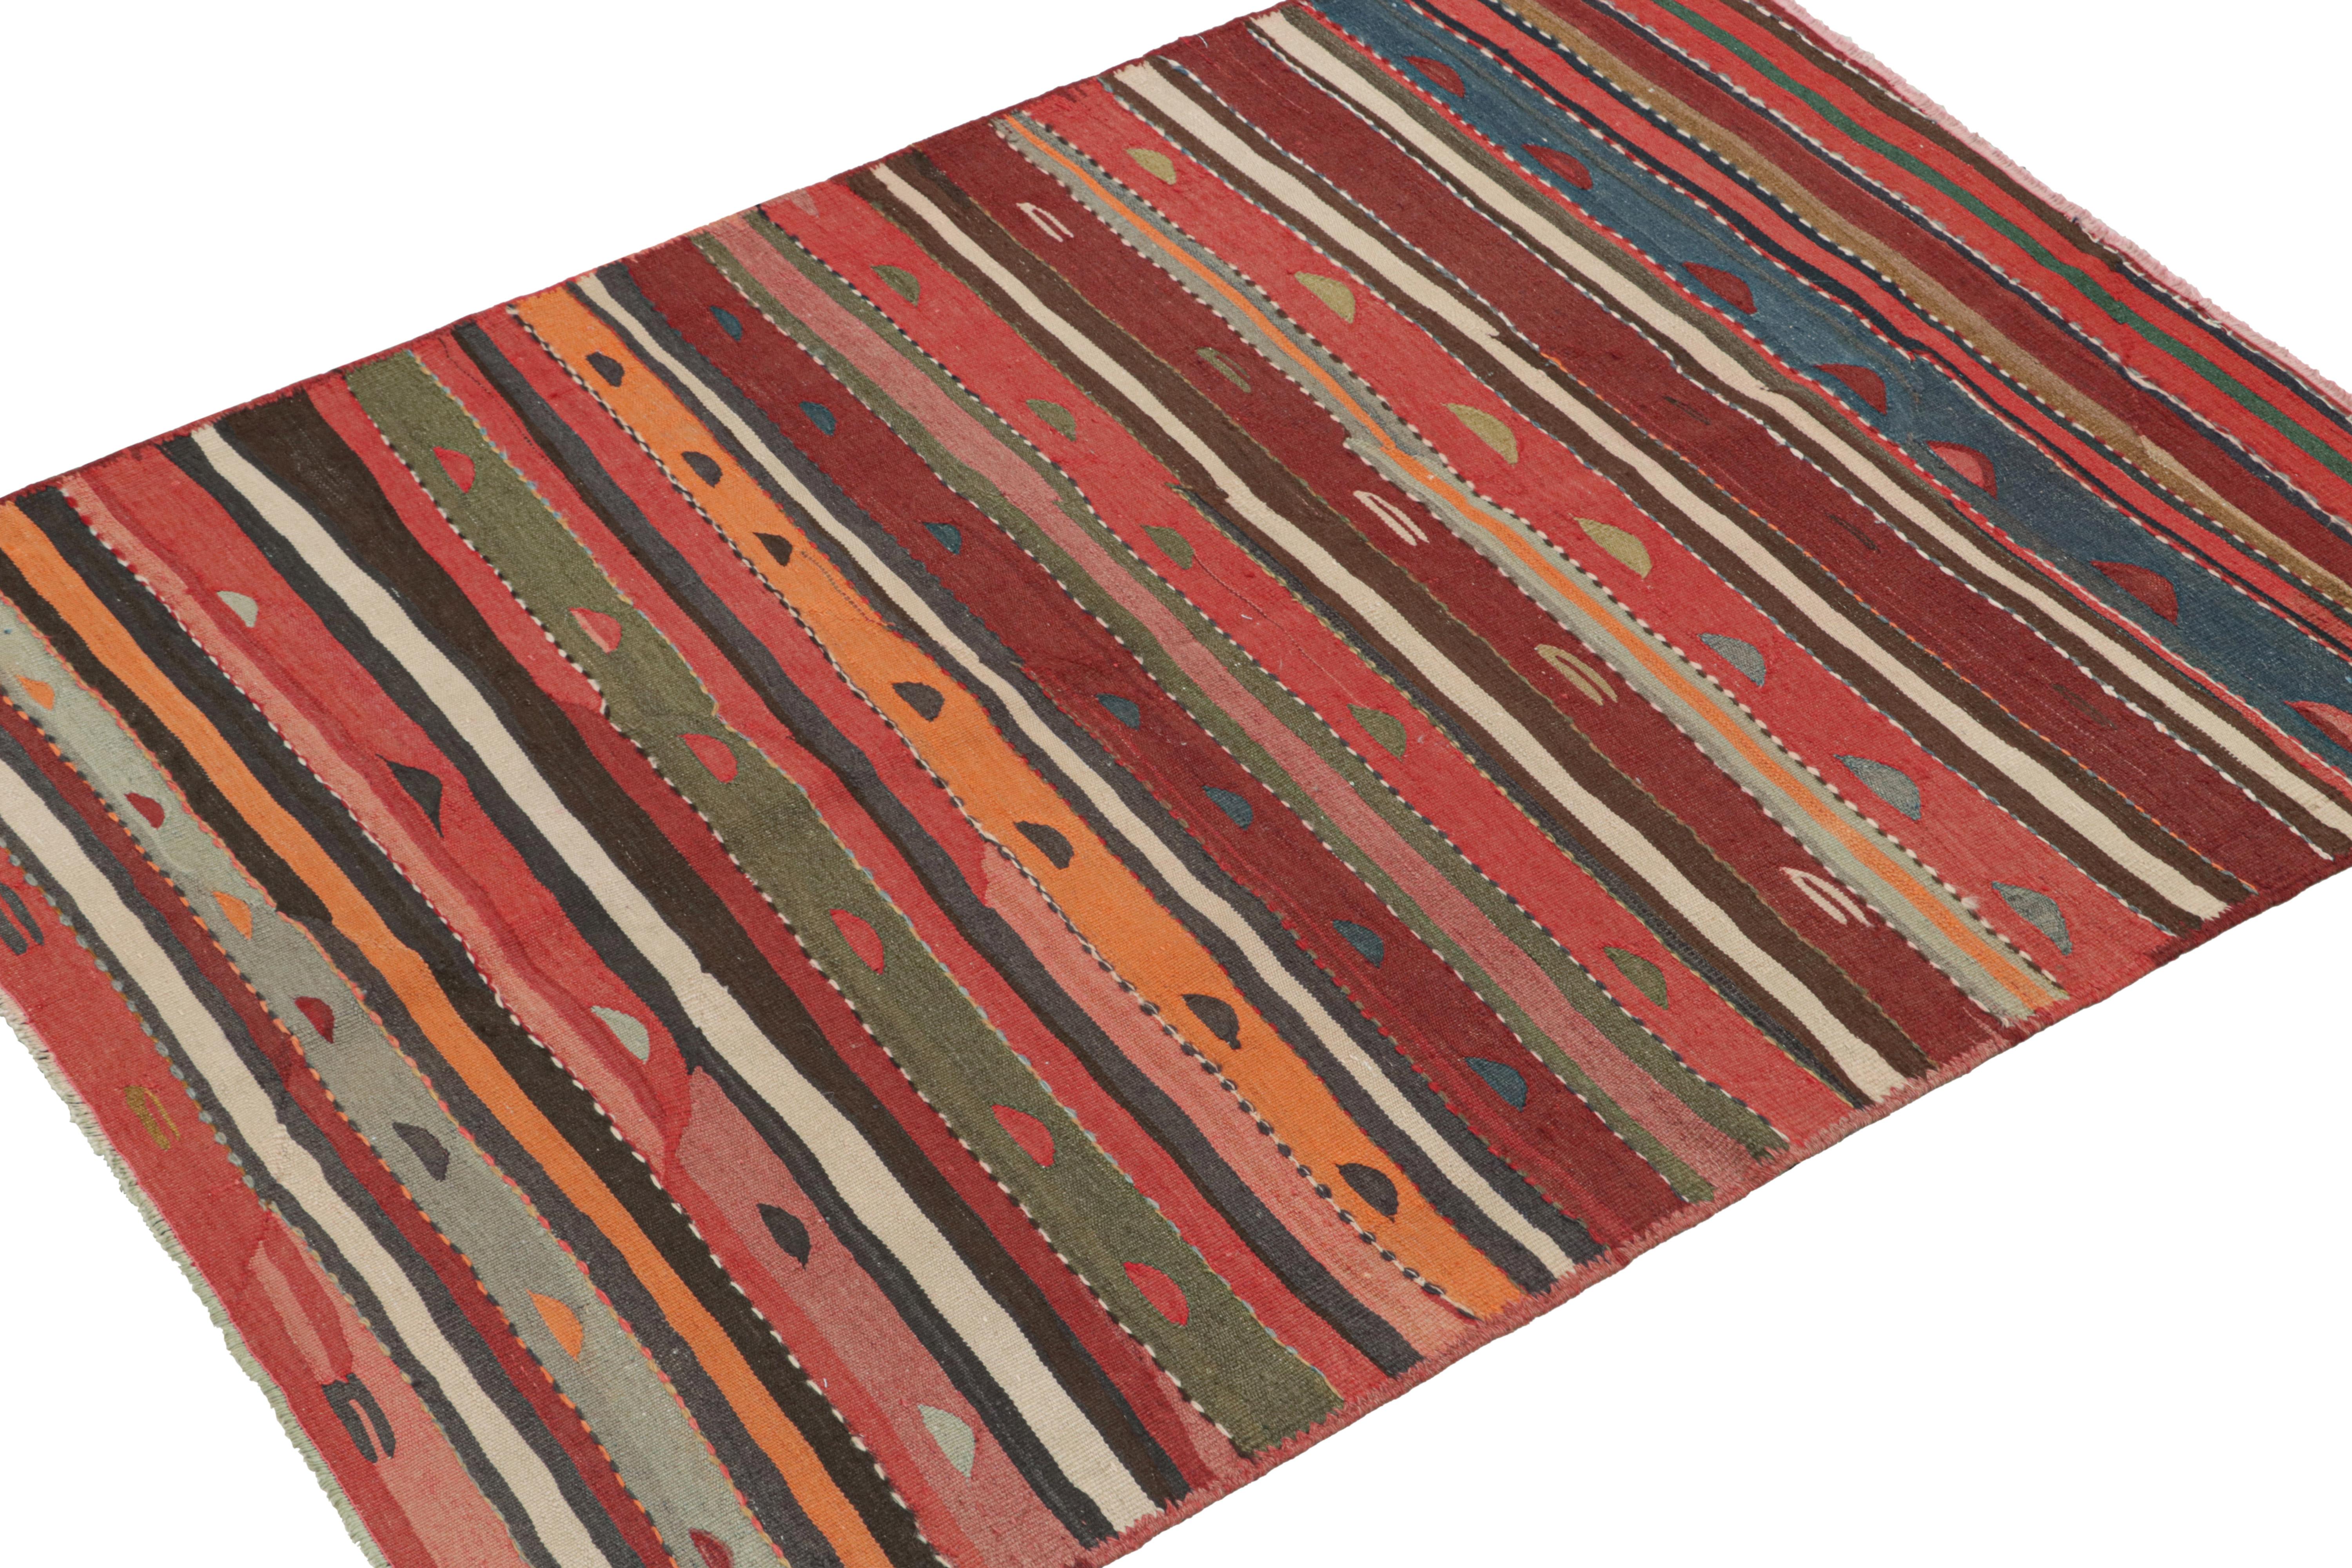 Tribal Vintage Northwest Persian Kilim with Colorful Geometric Patterns For Sale